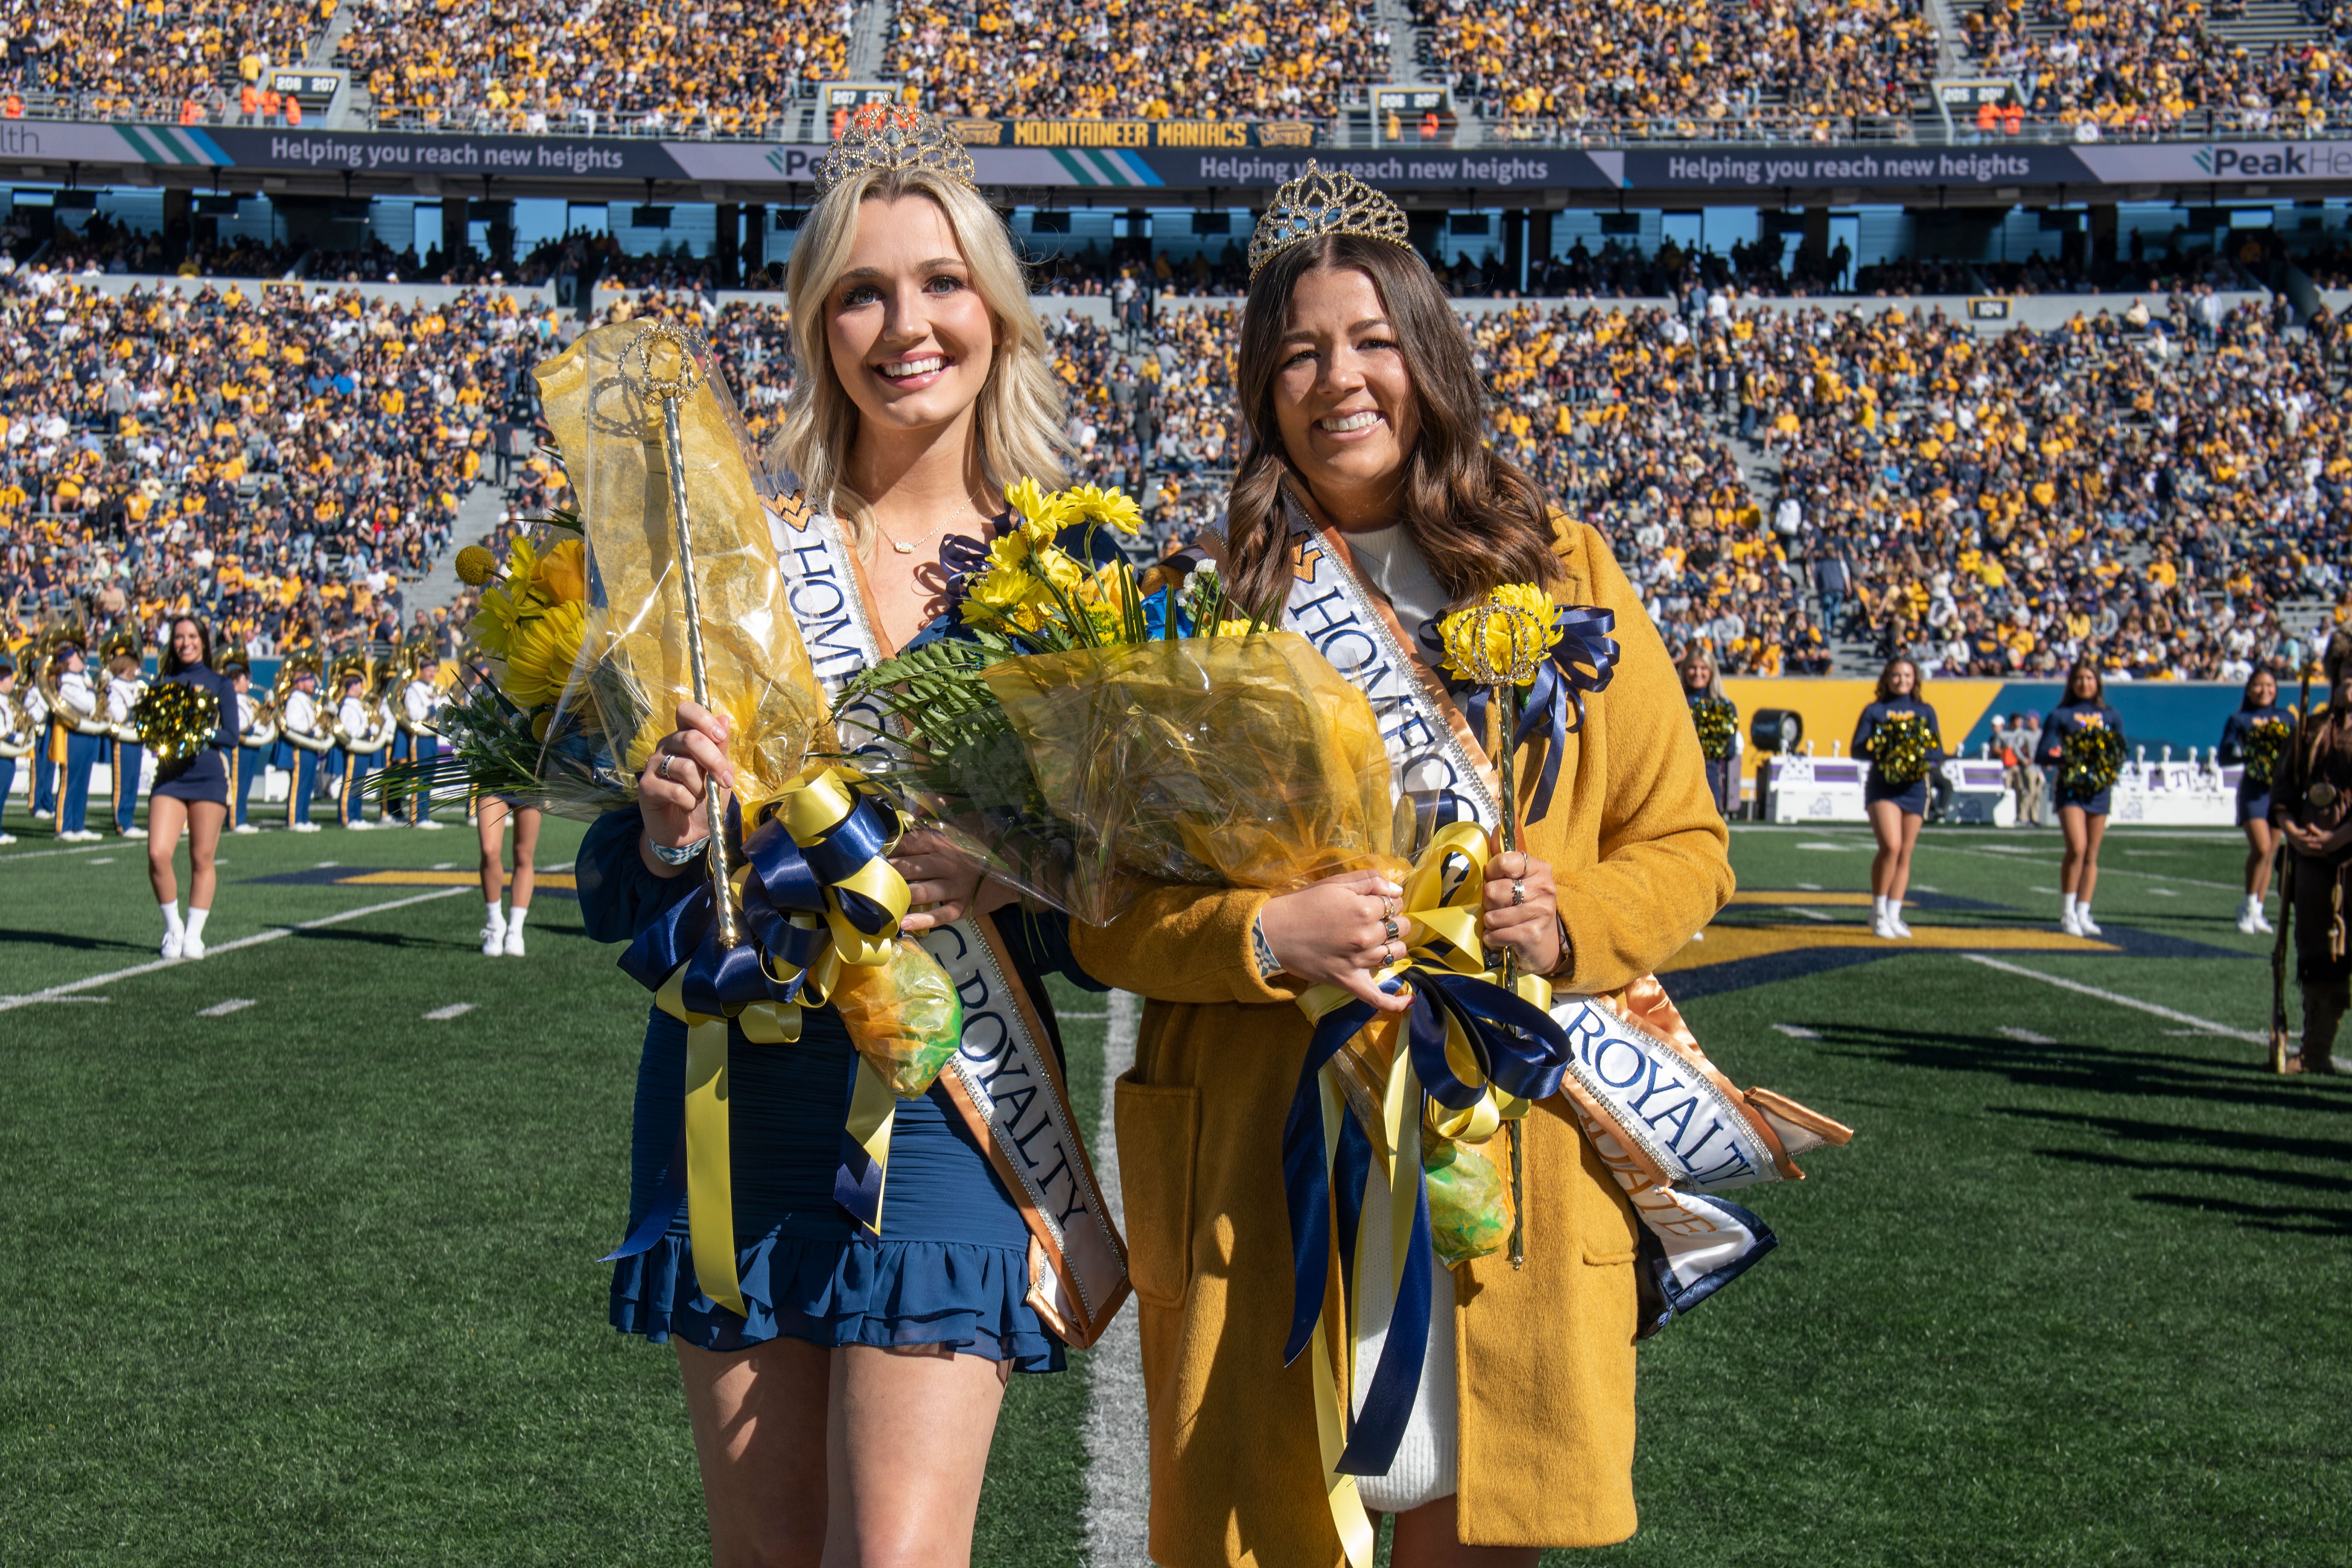 Photo featuring WVU Homecoming Royalty. Two women were chosen for the honor and each are on the football field wearing a crown and holding a large bouquet of flowers. 